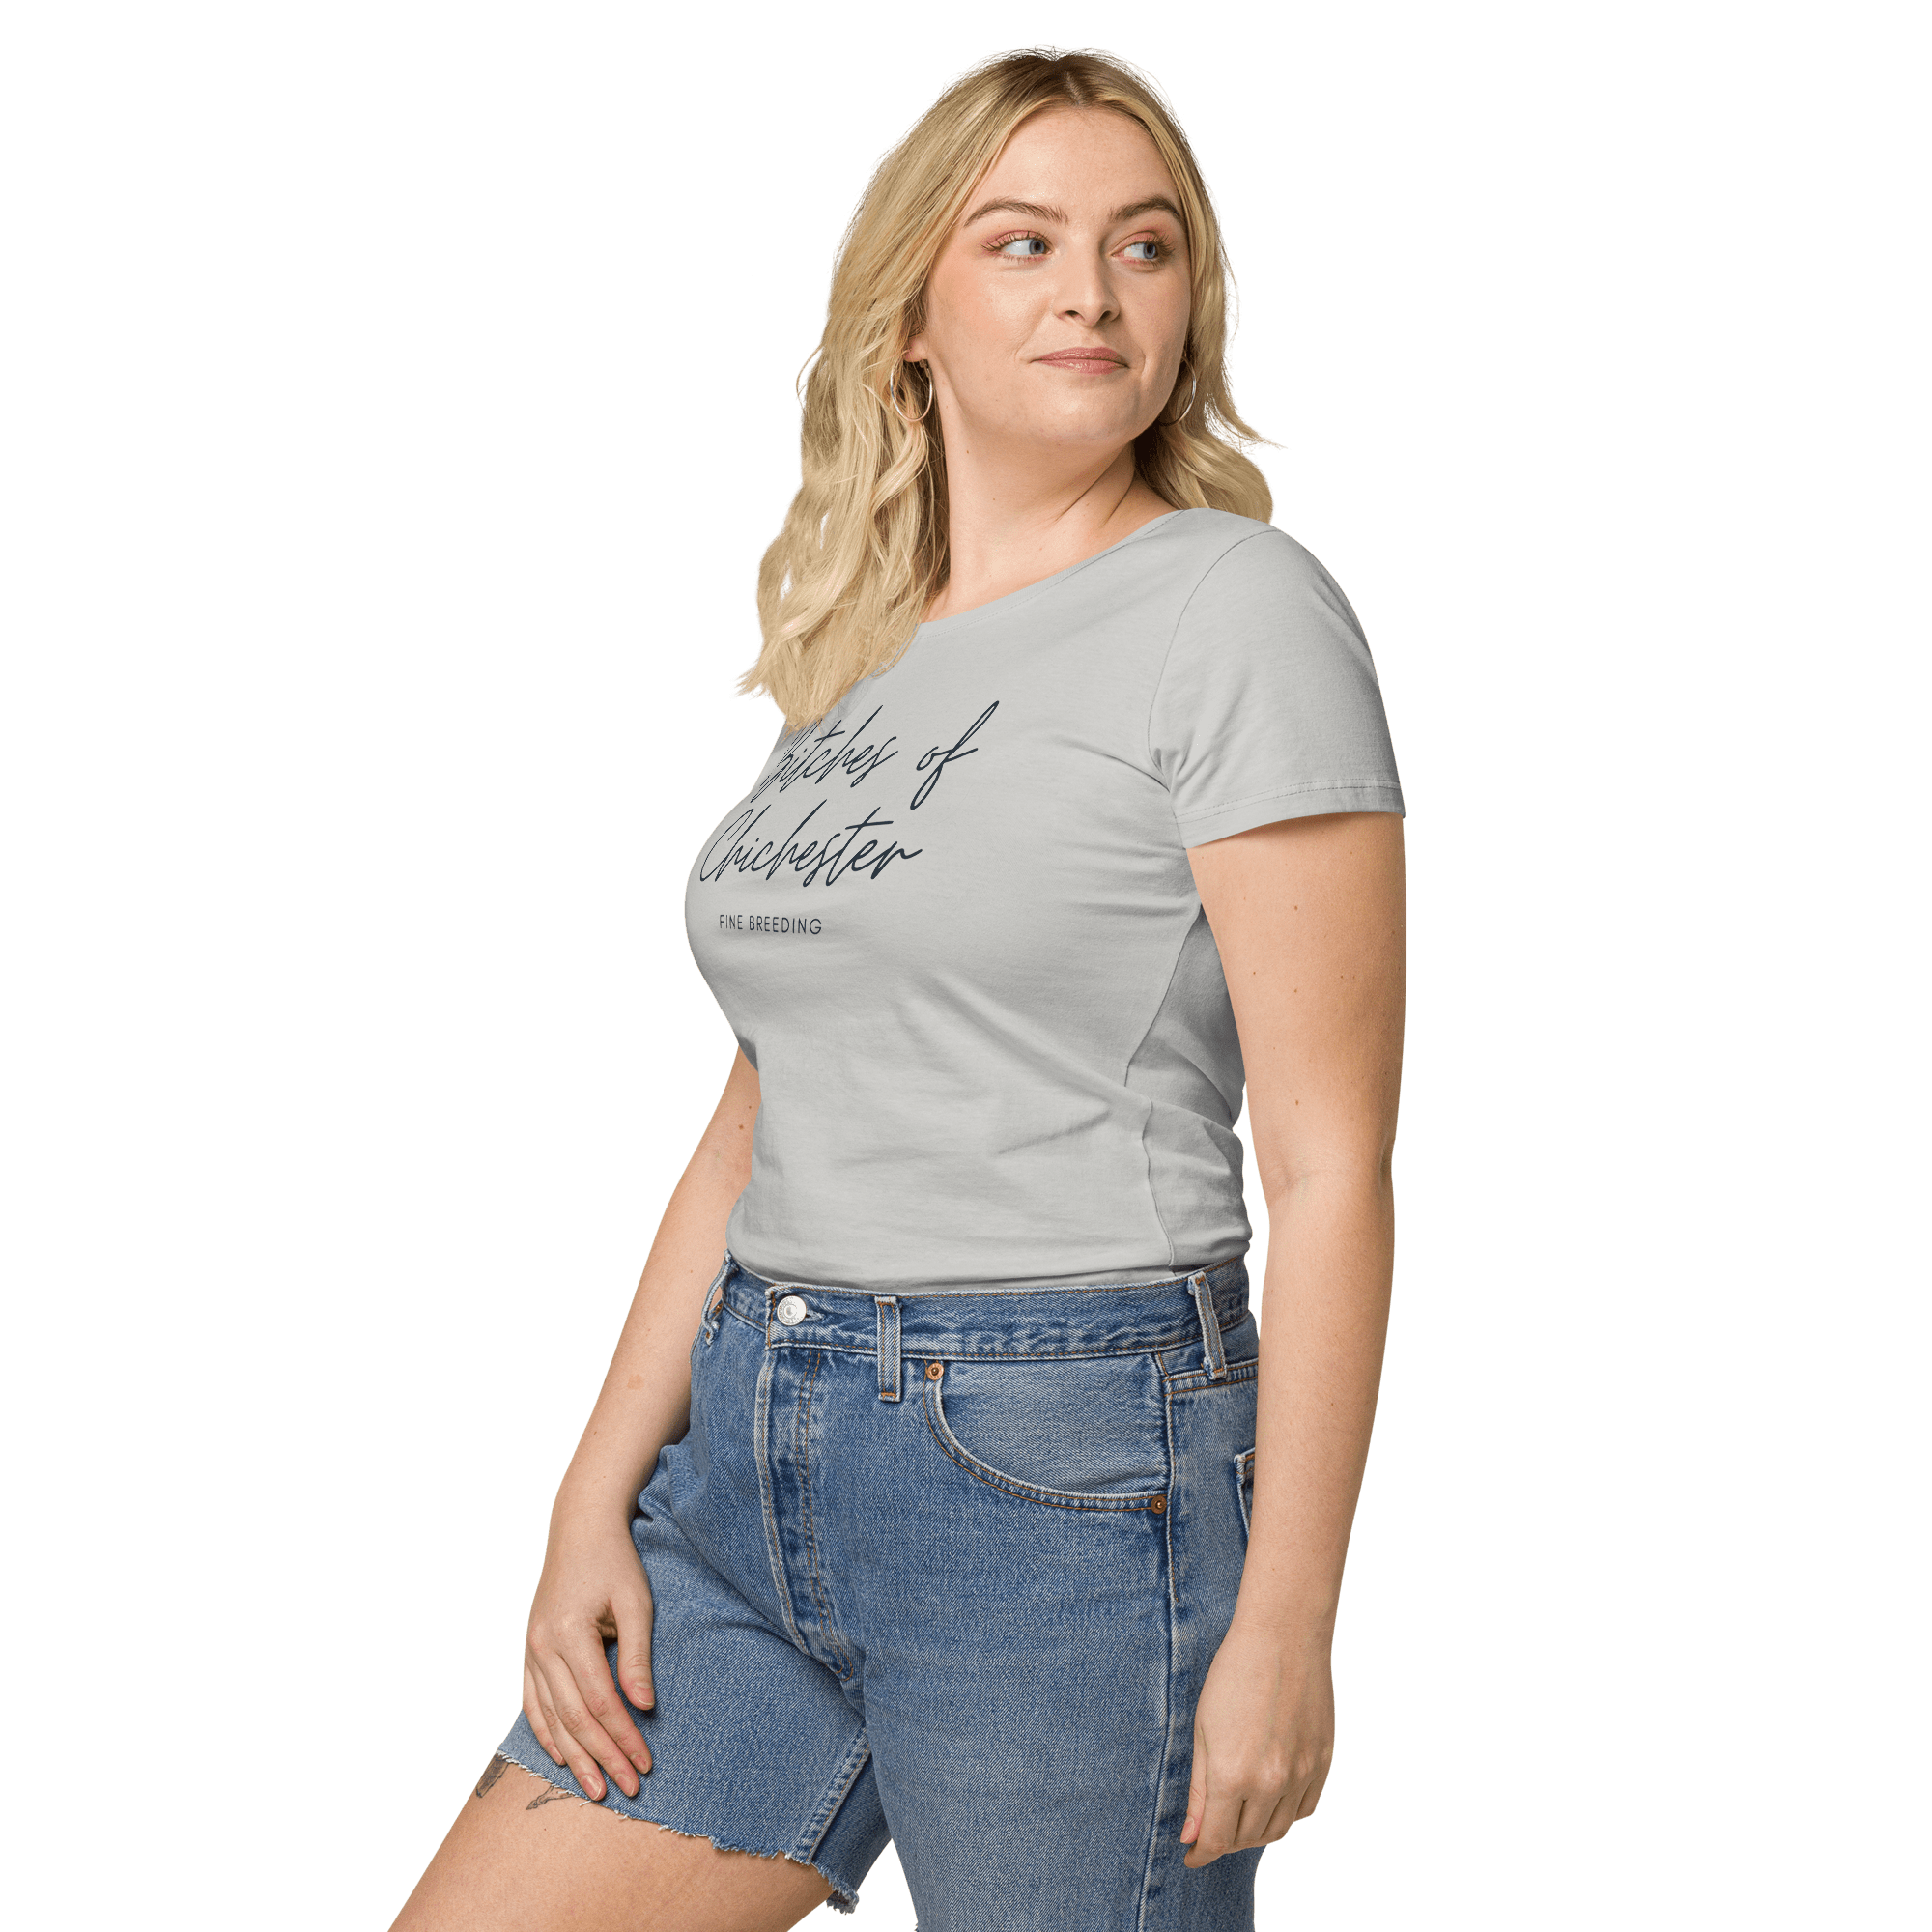 Bitches of Chichester | Women’s Organic T-shirt Pure grey / S Shirts & Tops Jolly & Goode